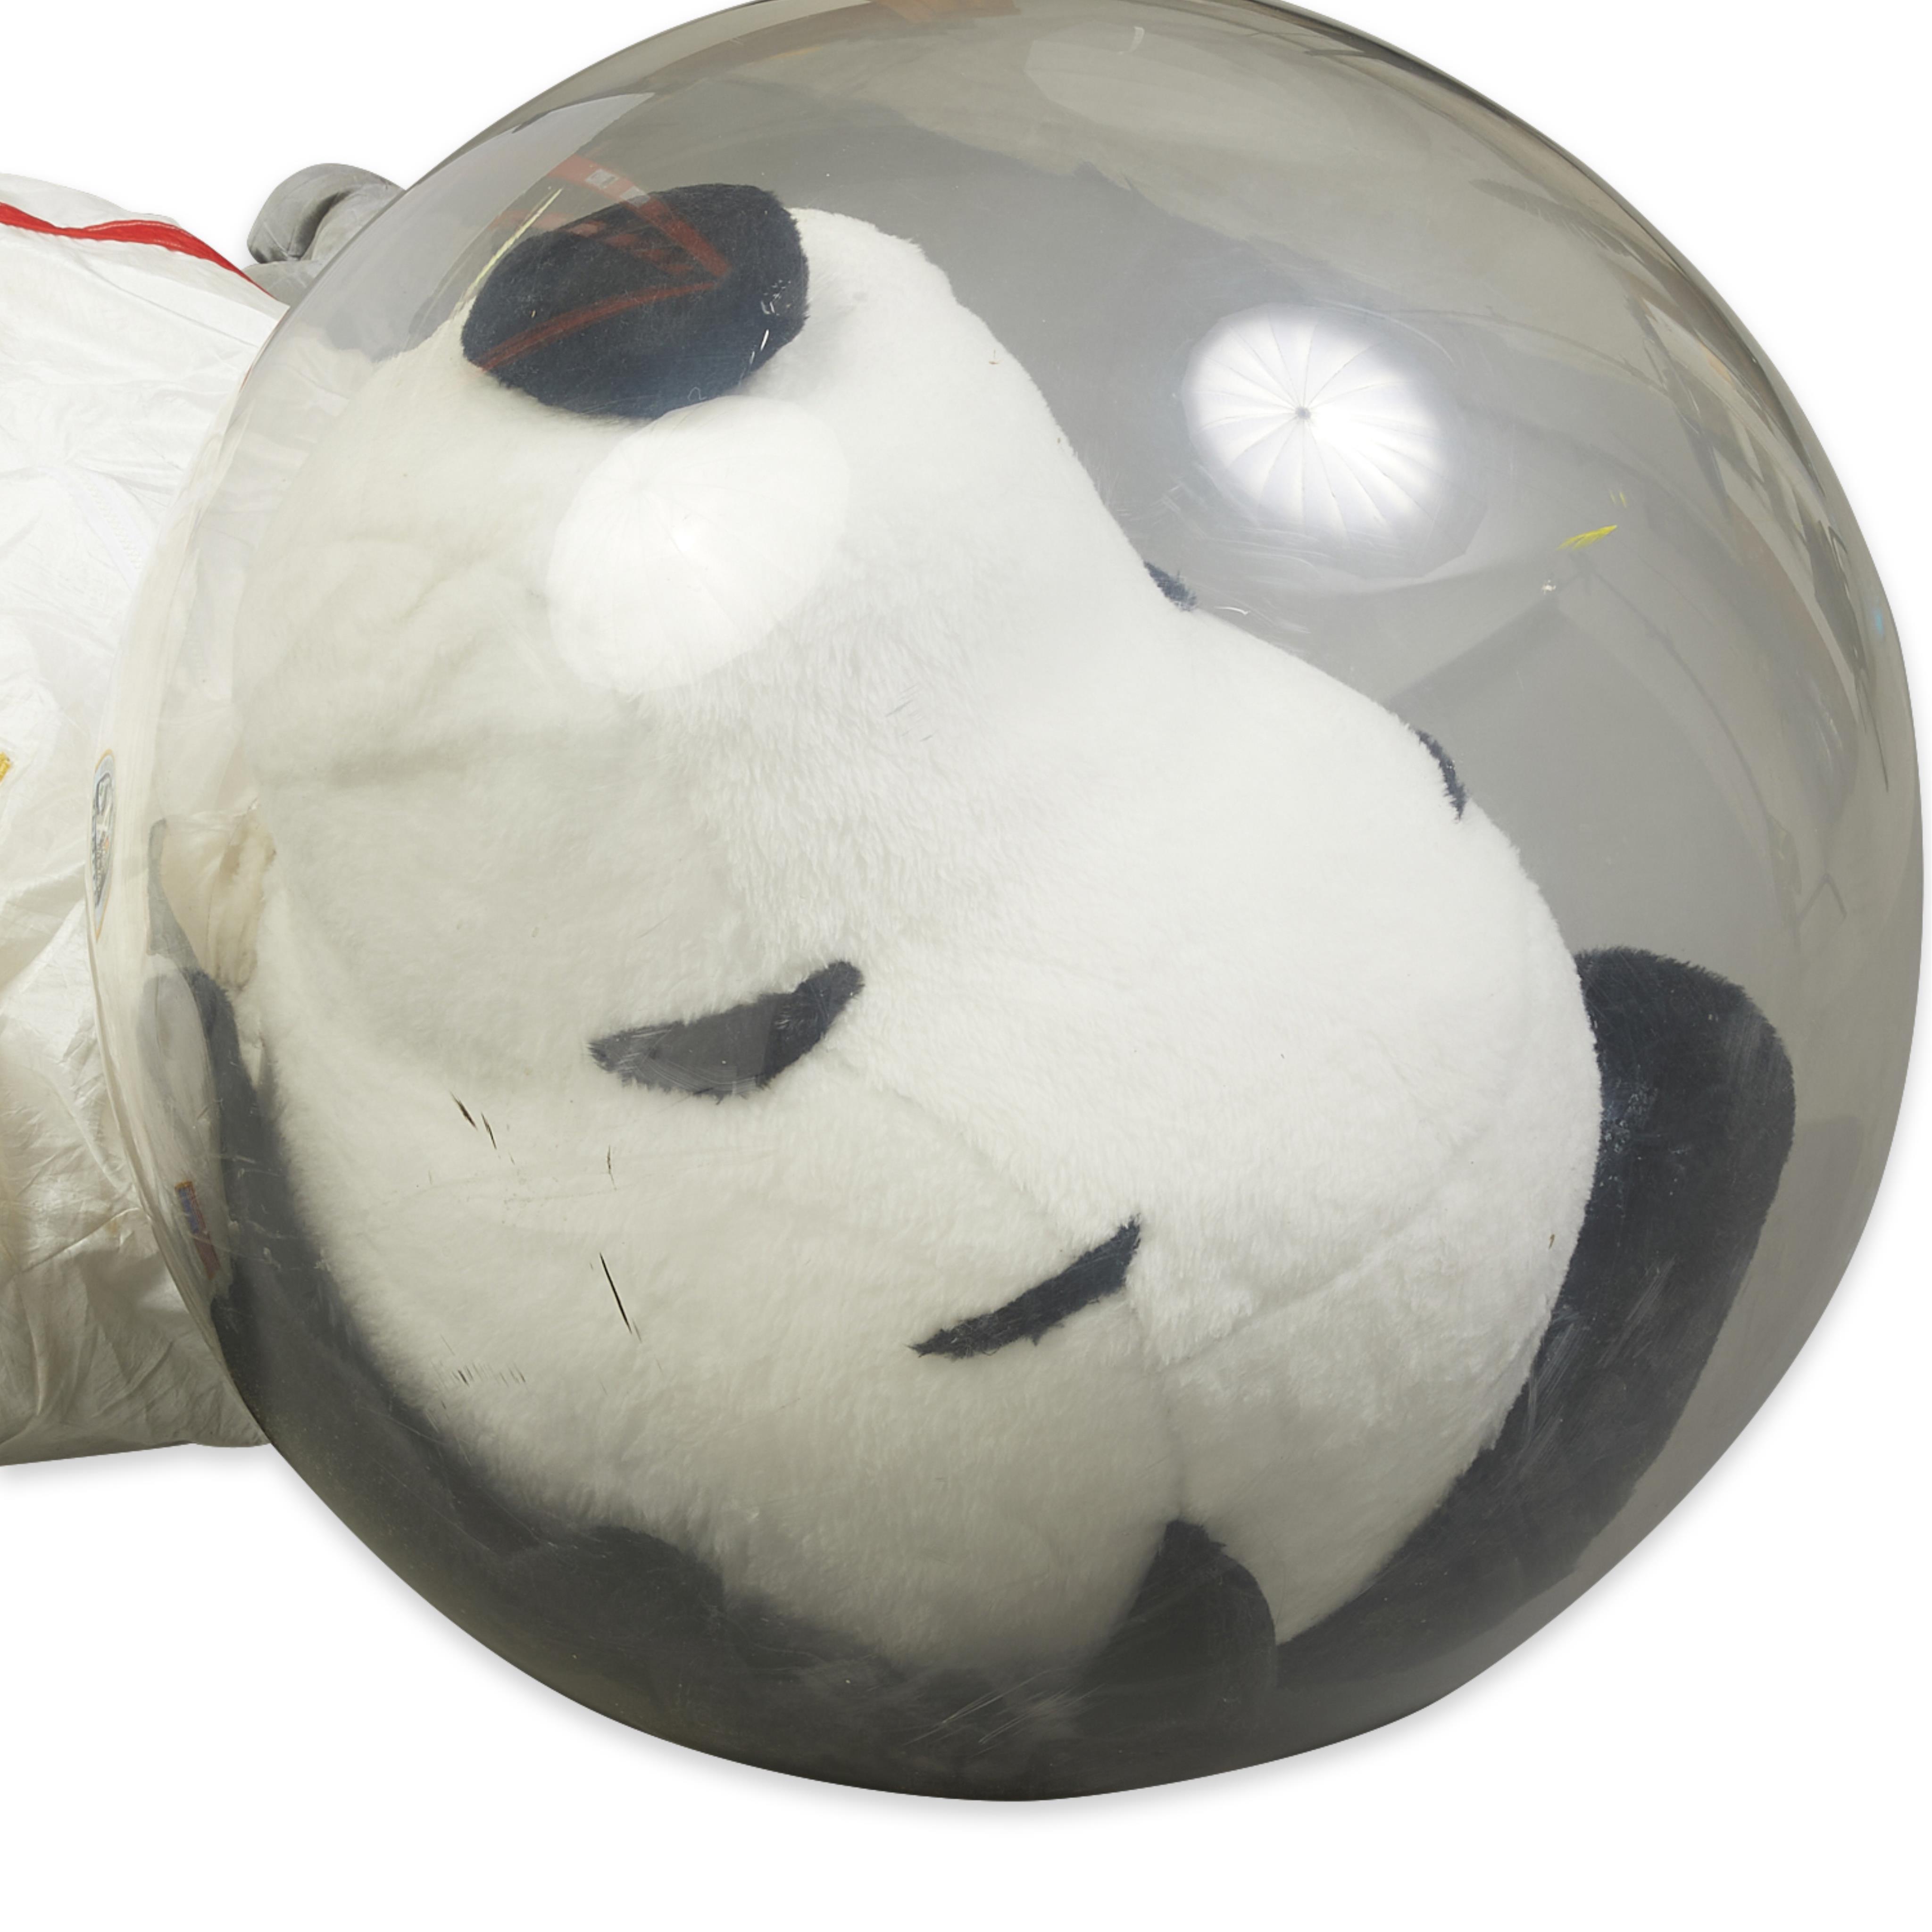 Very Large Stuffed Astronaut Snoopy Doll - Image 7 of 8